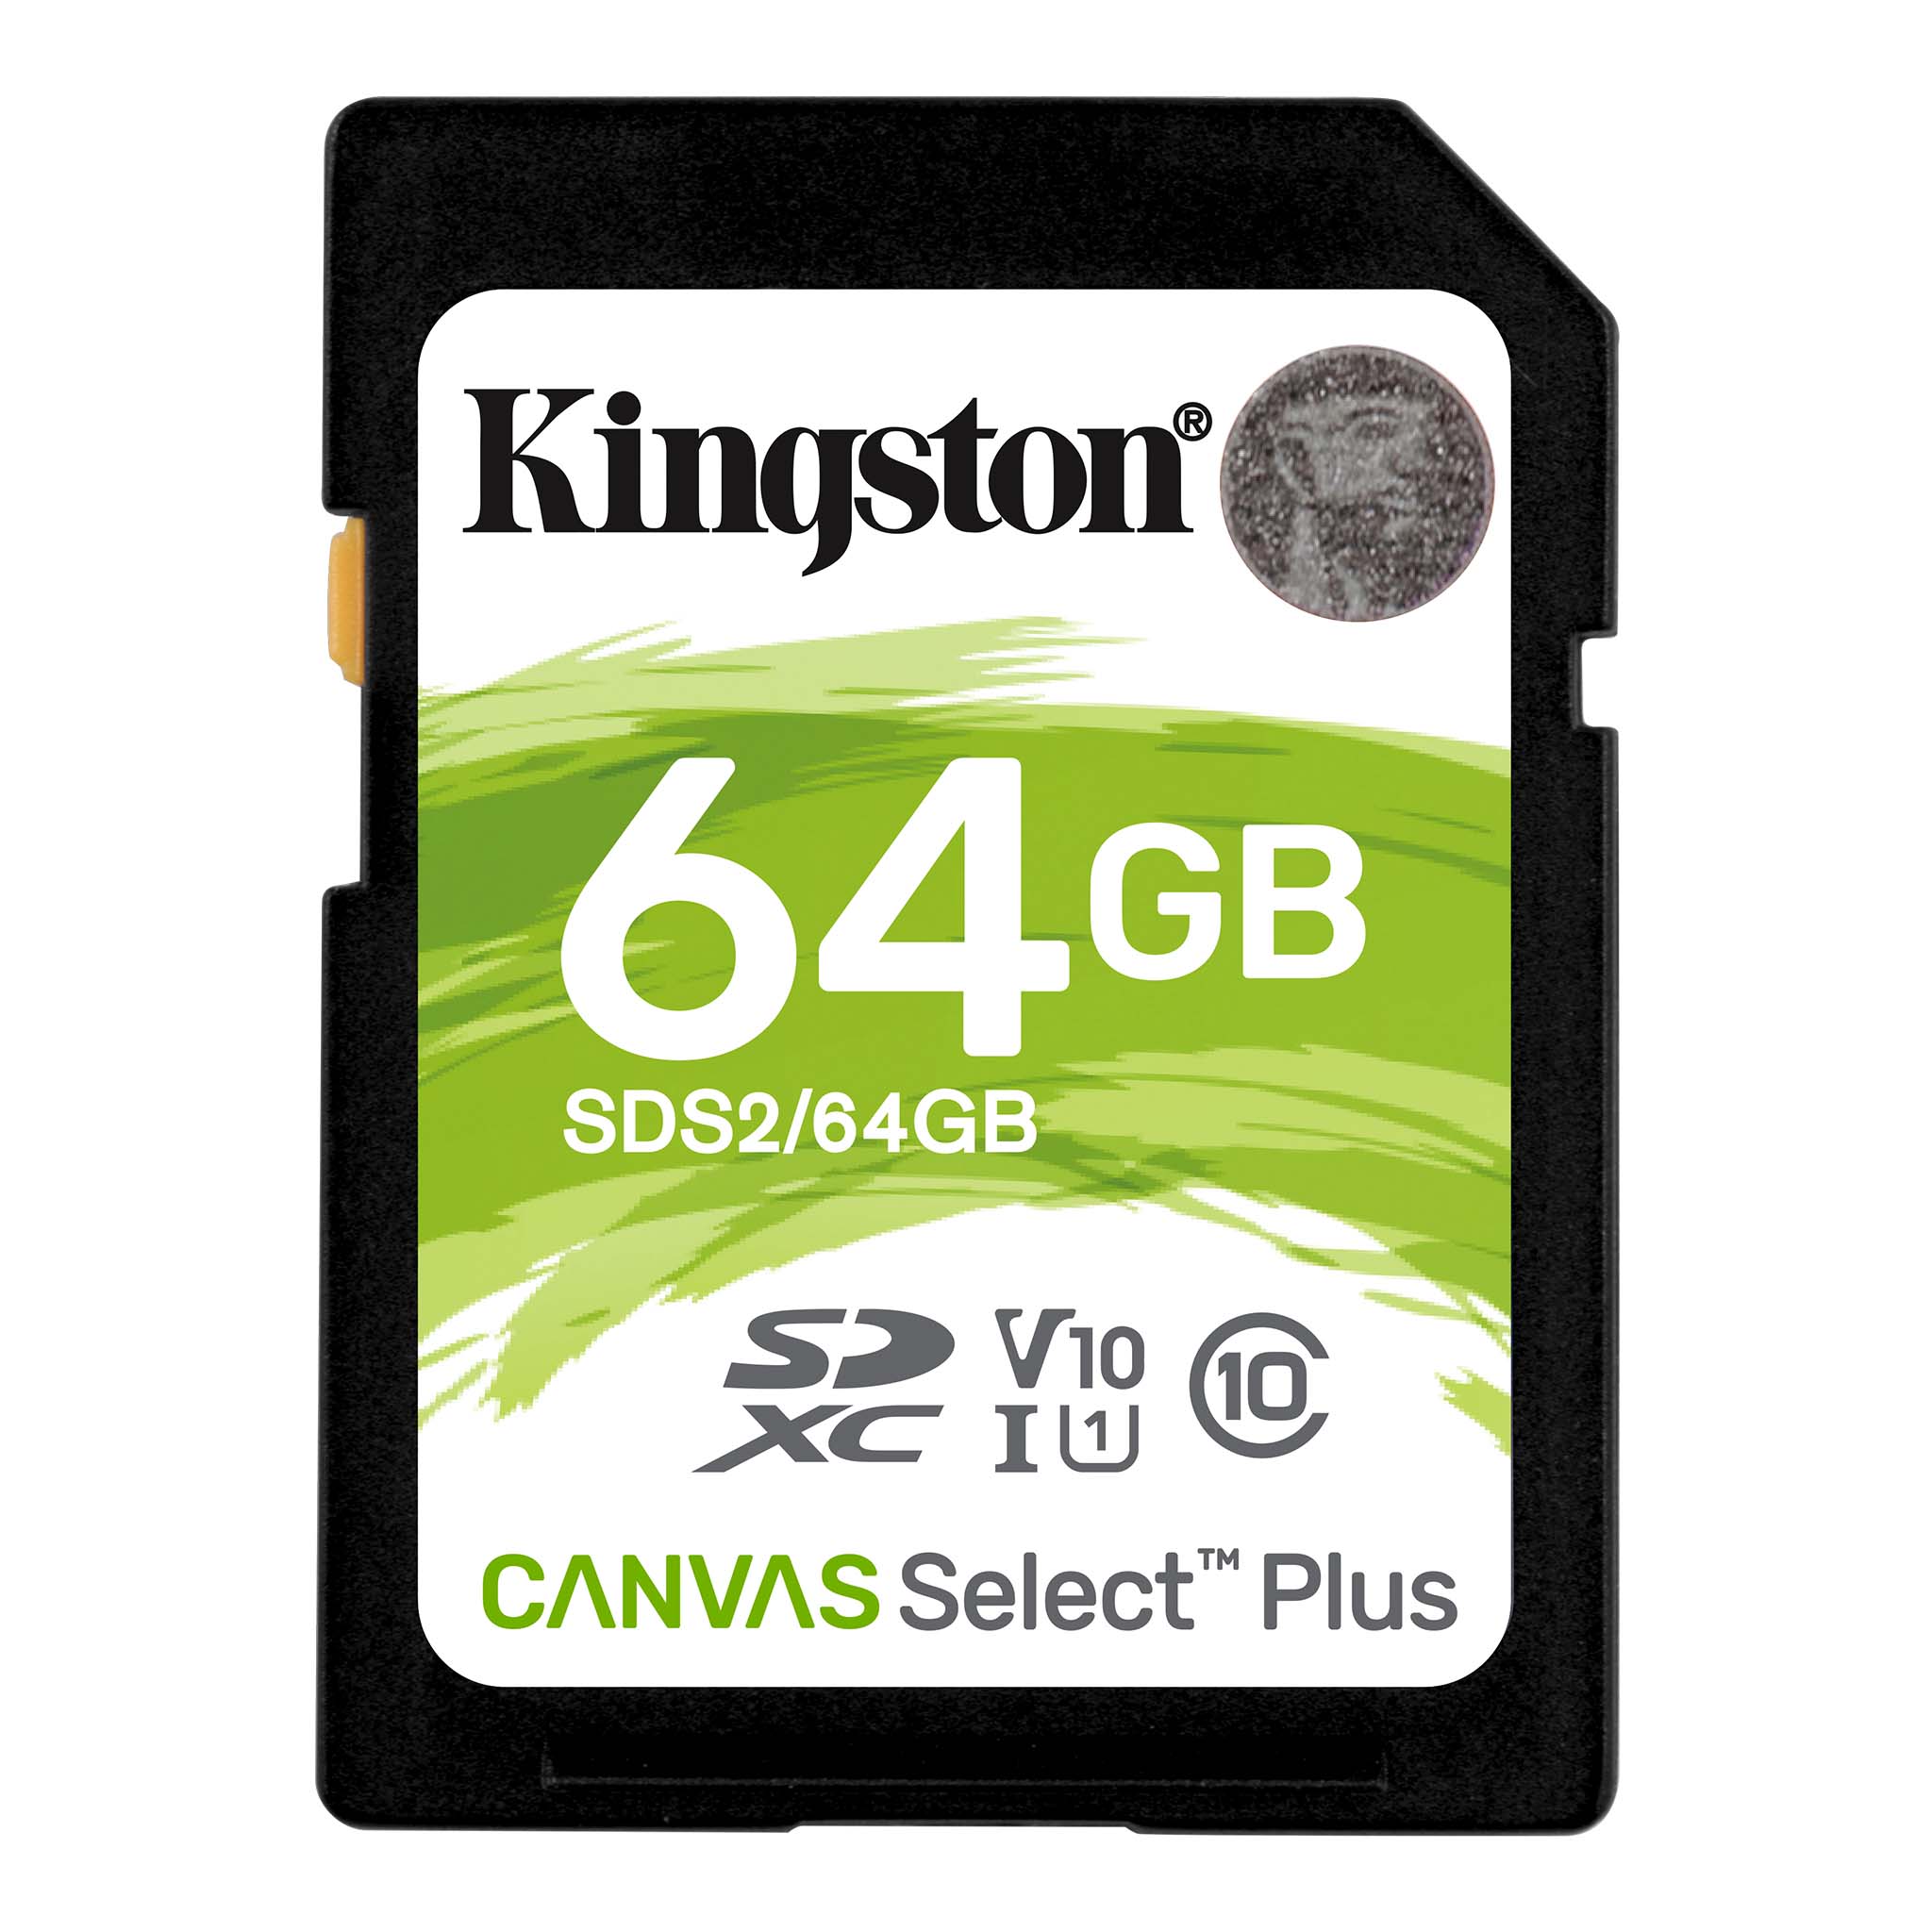 Kingston 64GB SD Card SDHC/SDXC Class10 UHS-I Flash Memory 85MB/s Read 100MB/s Write Full HD for Photo Video Camera